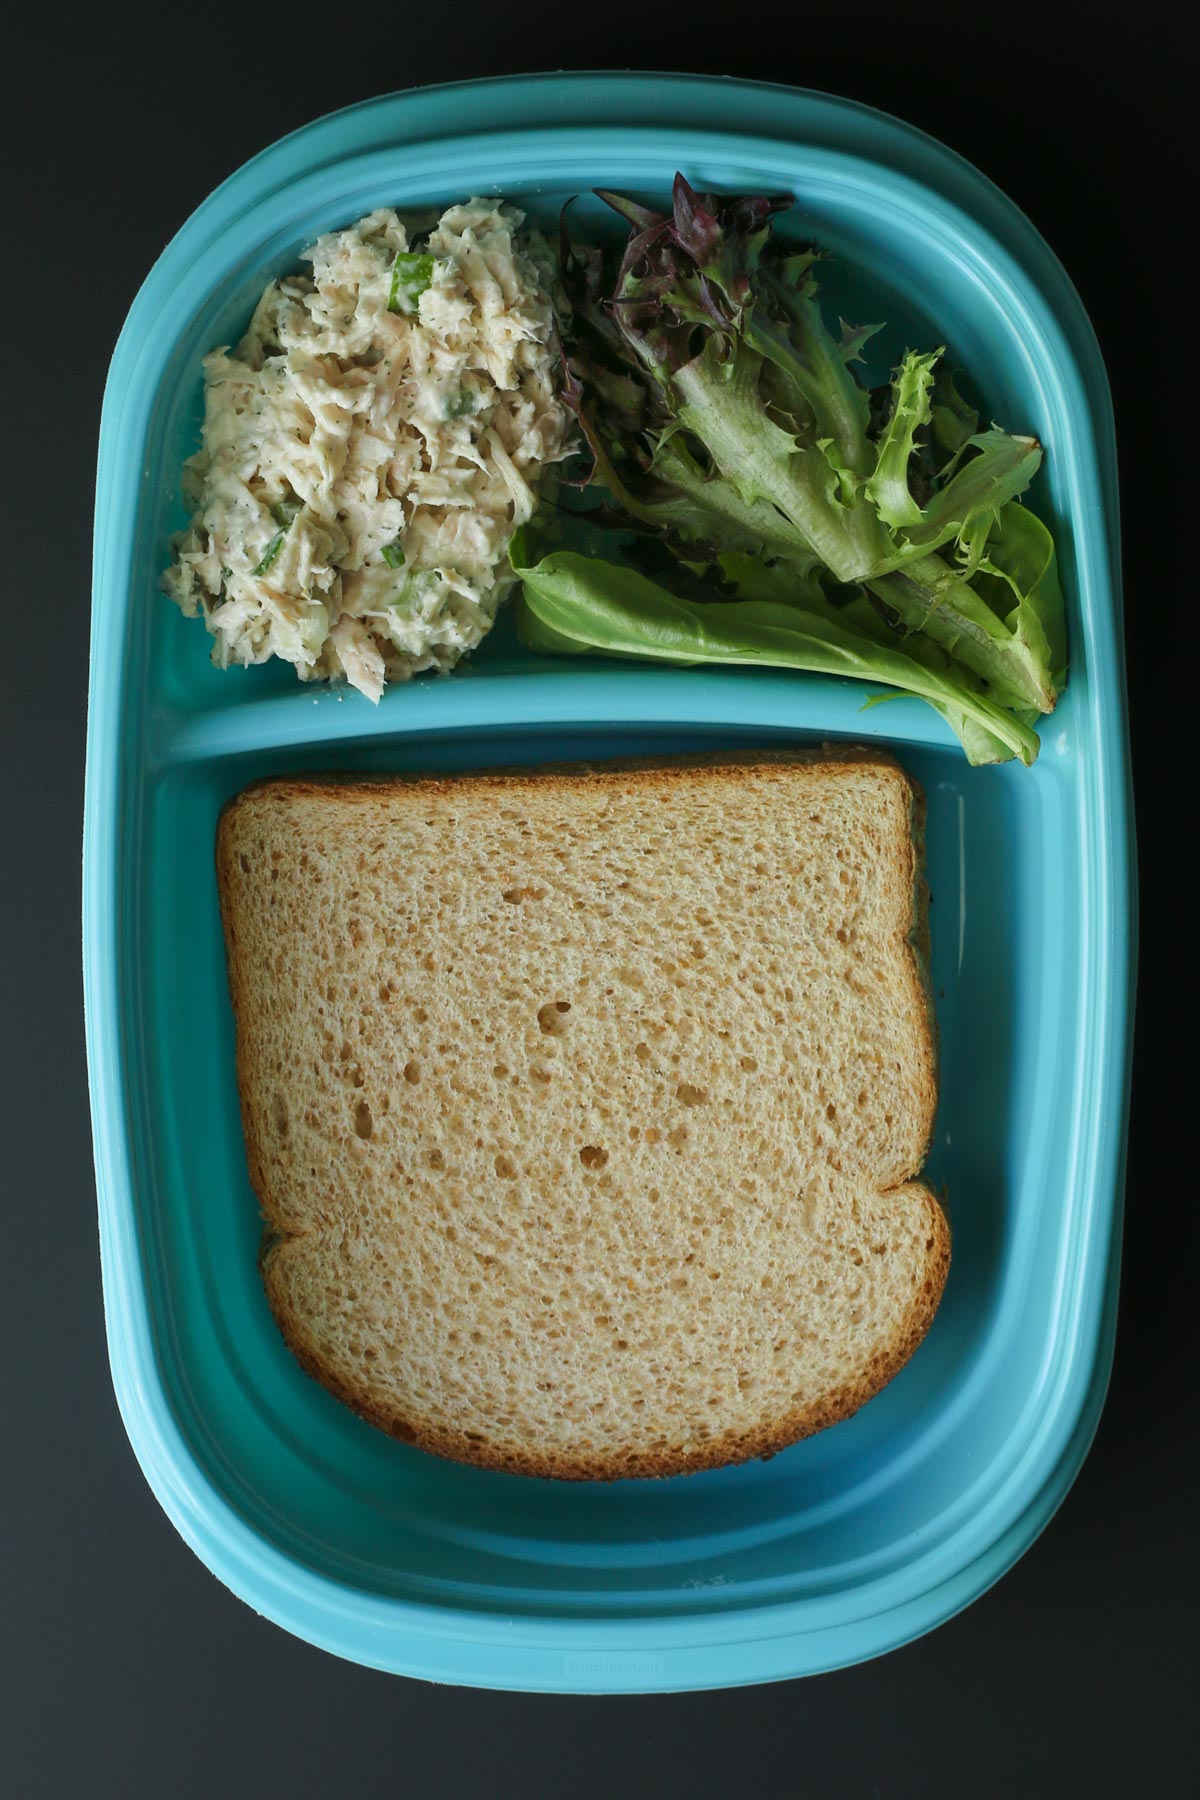 teal meal prep box with bread slices in one compartment and tuna salad and lettuce leaves in another.